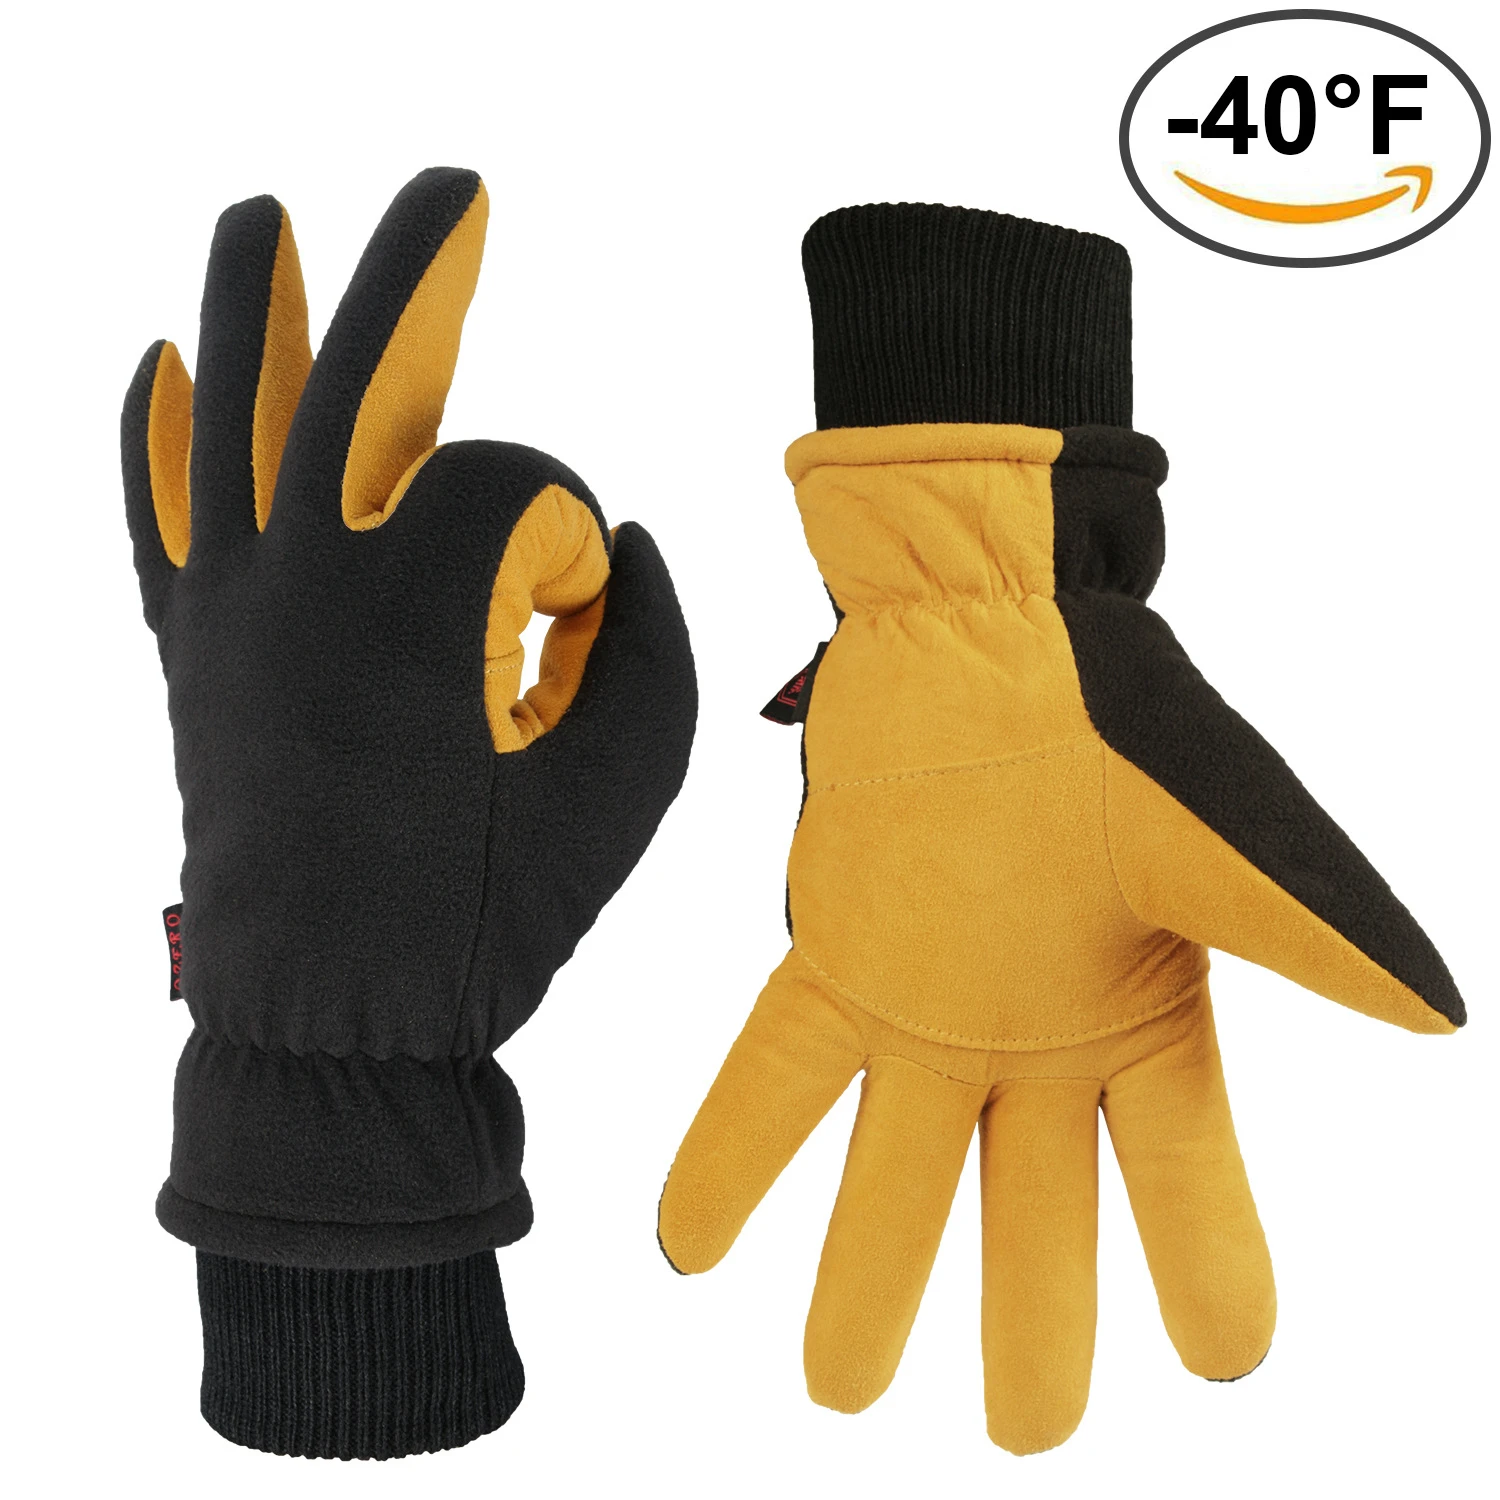 Winter Gloves Deerskin Leather Water-Resistant Windproof Insulated Work Glove for Driving Cycling Hiking Snow Skiing 8008 industrial safety gloves